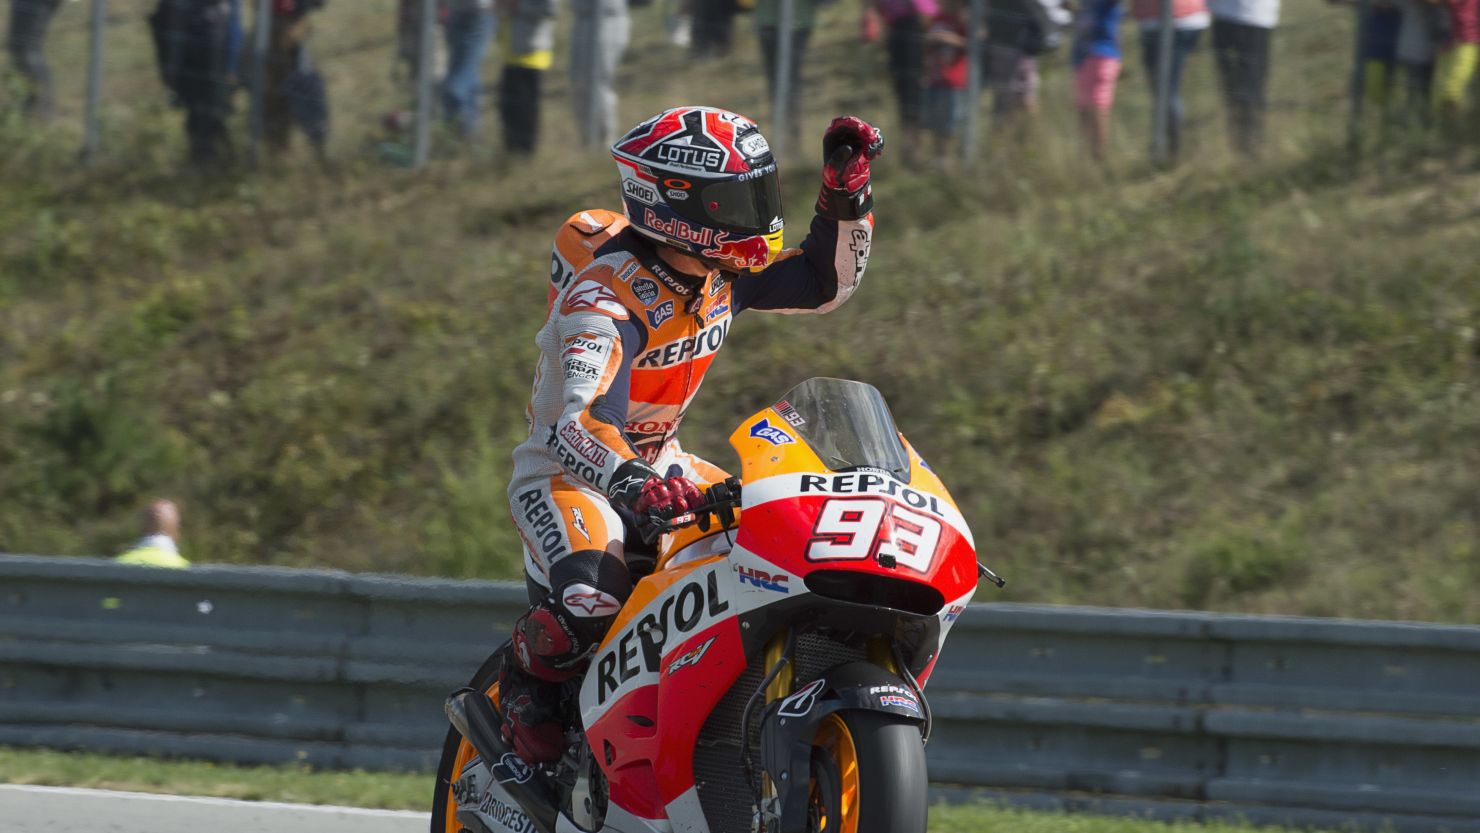 Marc Marquez missed out on a record 11 straight wins, but still leads the standings by 77 points.